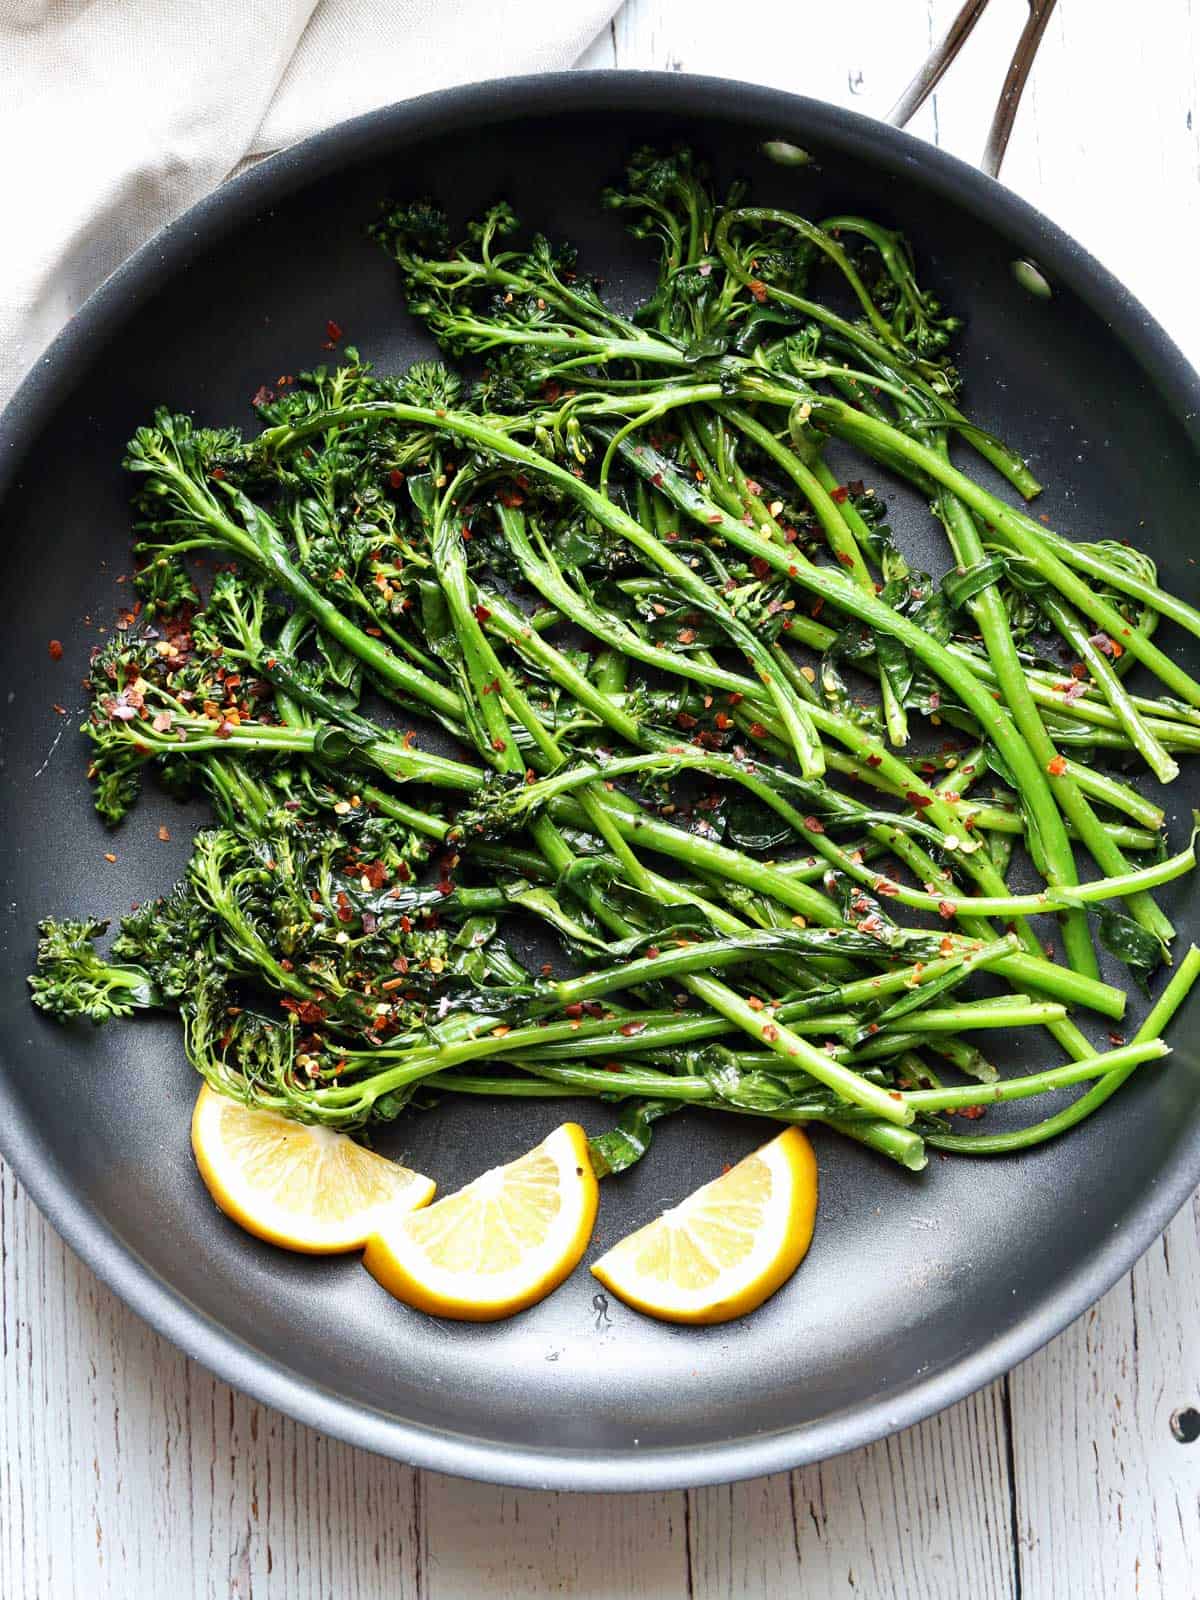 Sauteed broccolini is served with lemon slices.